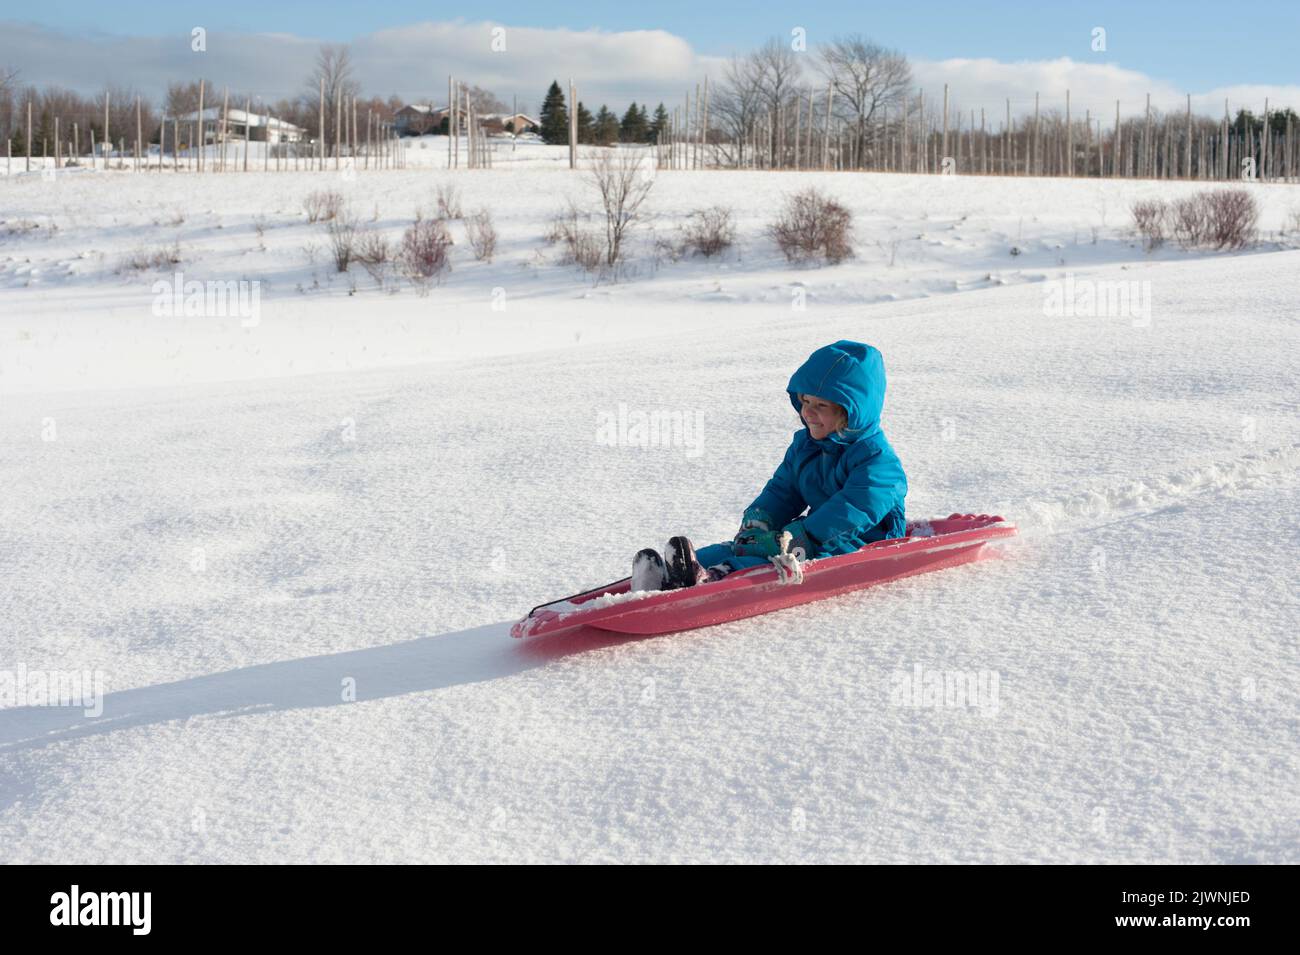 A two year old in a blue snowsuit on a red toboggan slides down a gentle hill in the Canadian countryside. Stock Photo